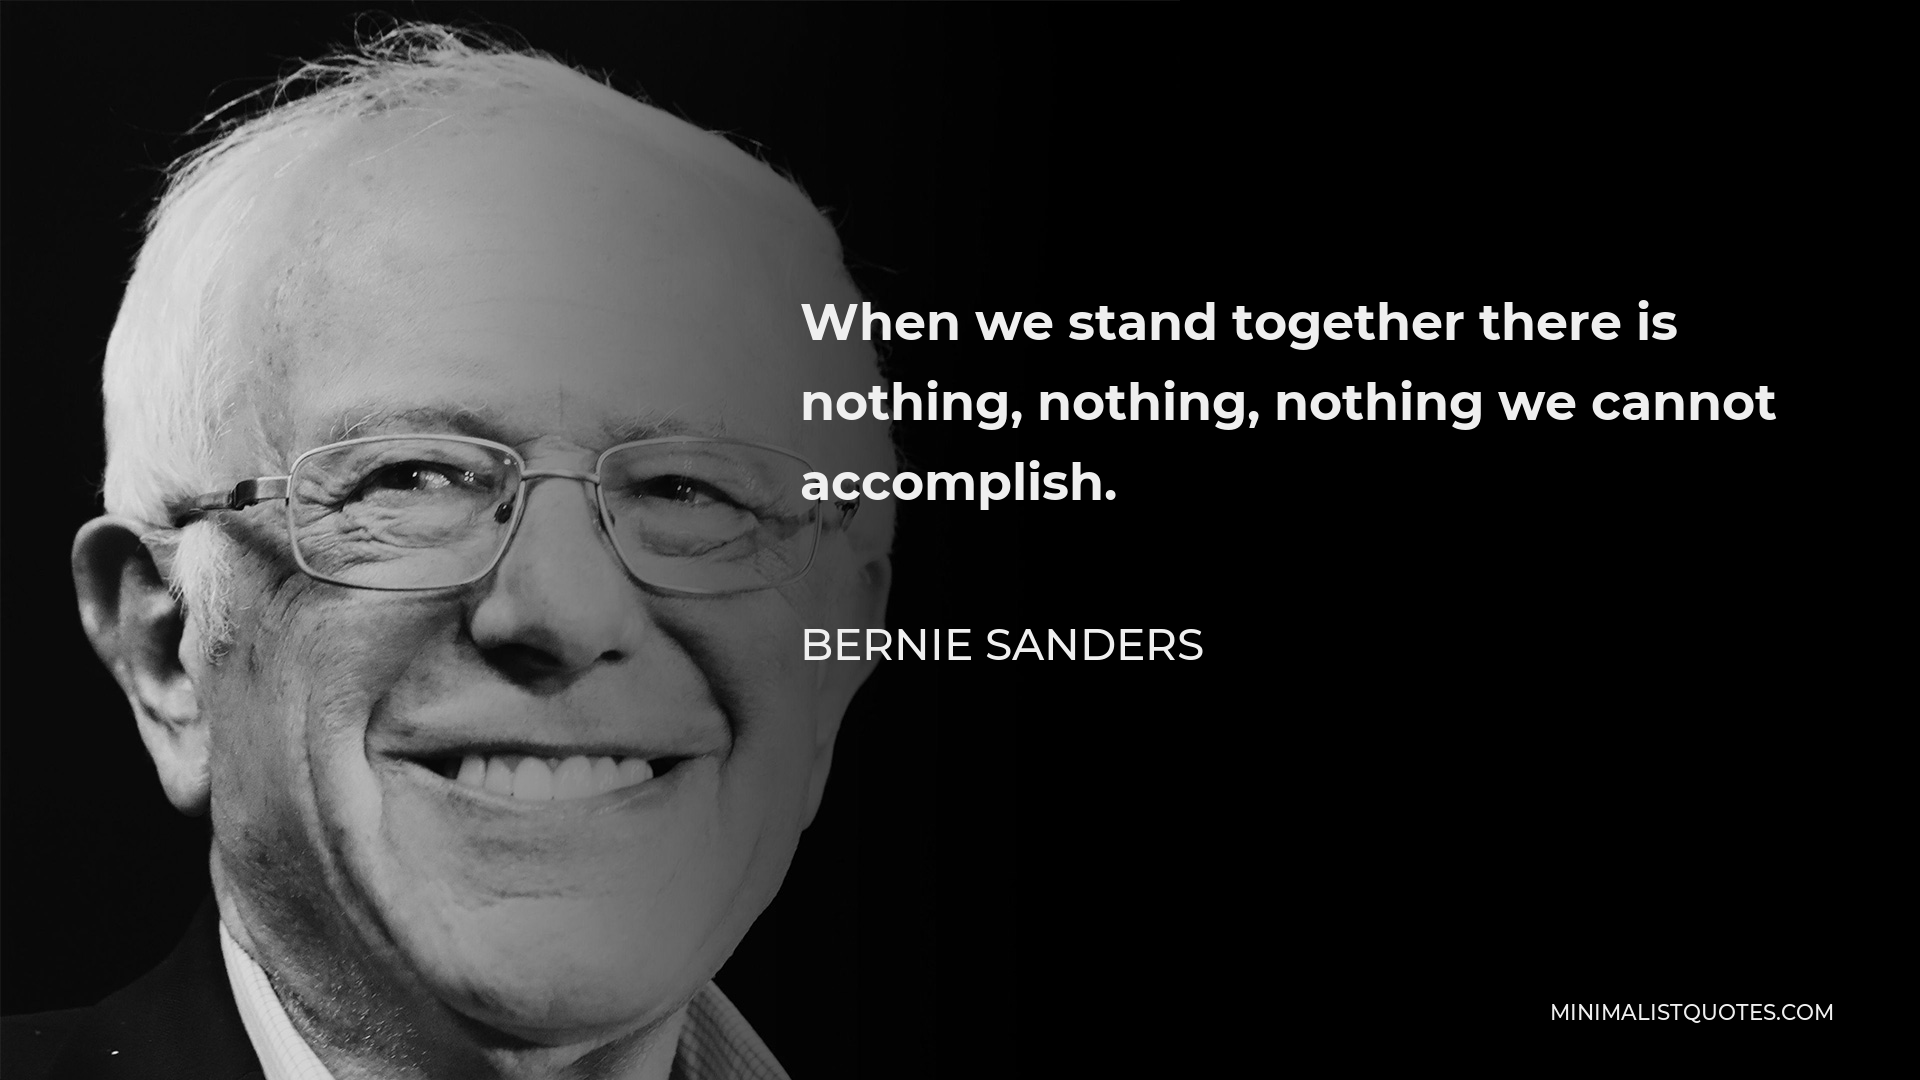 Bernie Sanders Quote - When we stand together there is nothing, nothing, nothing we cannot accomplish.